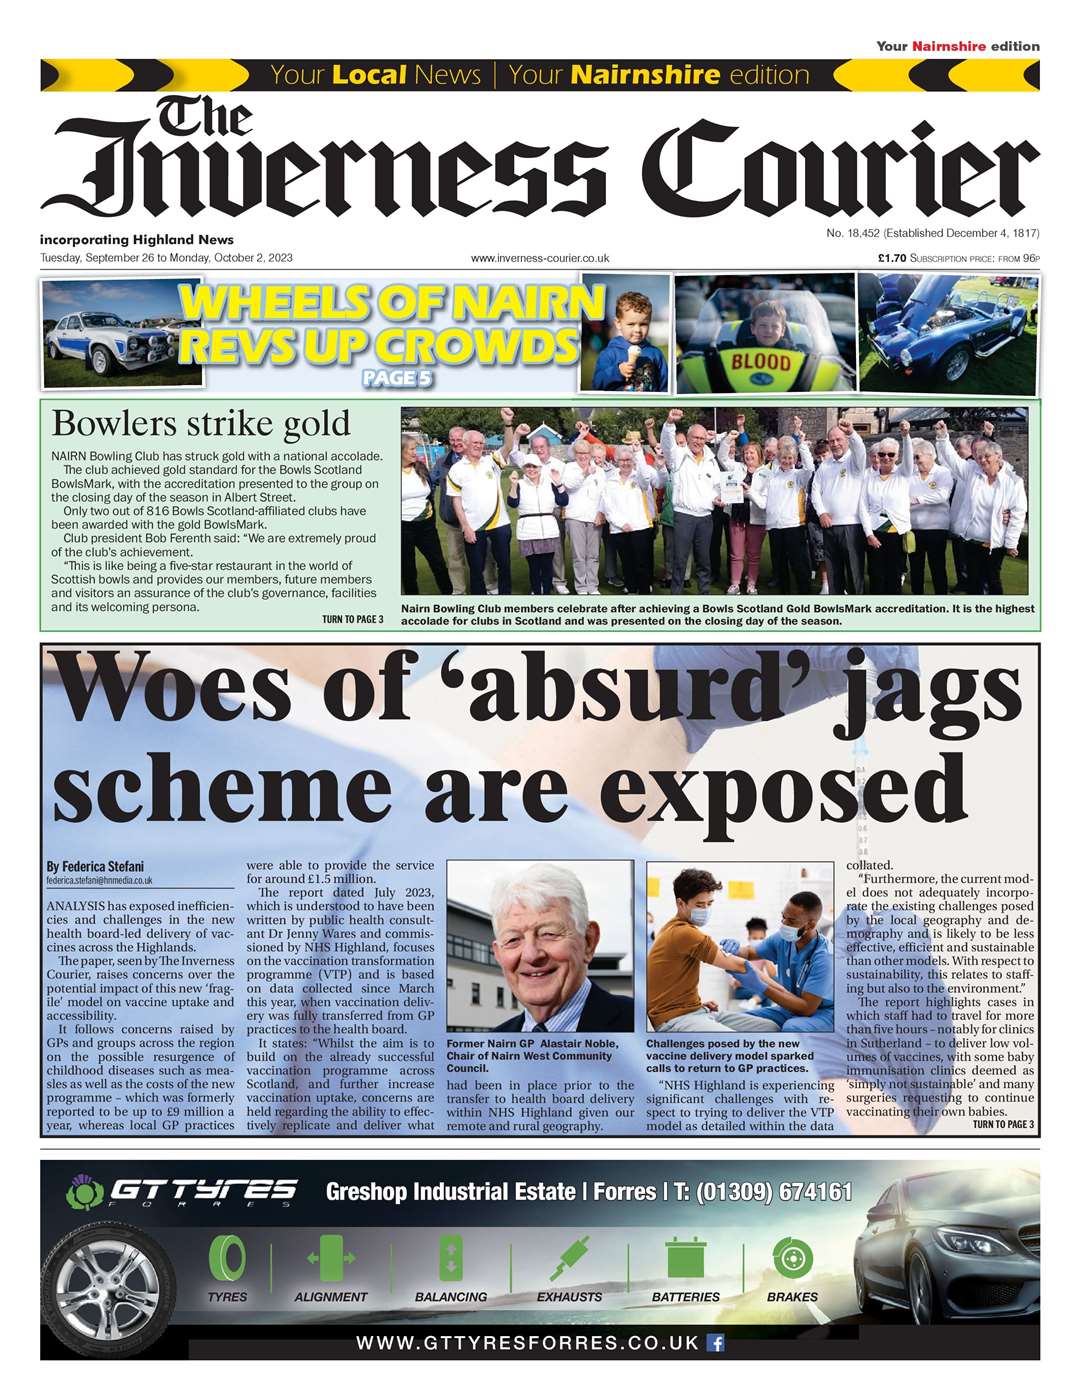 The Inverness Courier (Nairnshire edition), September 26, front page.